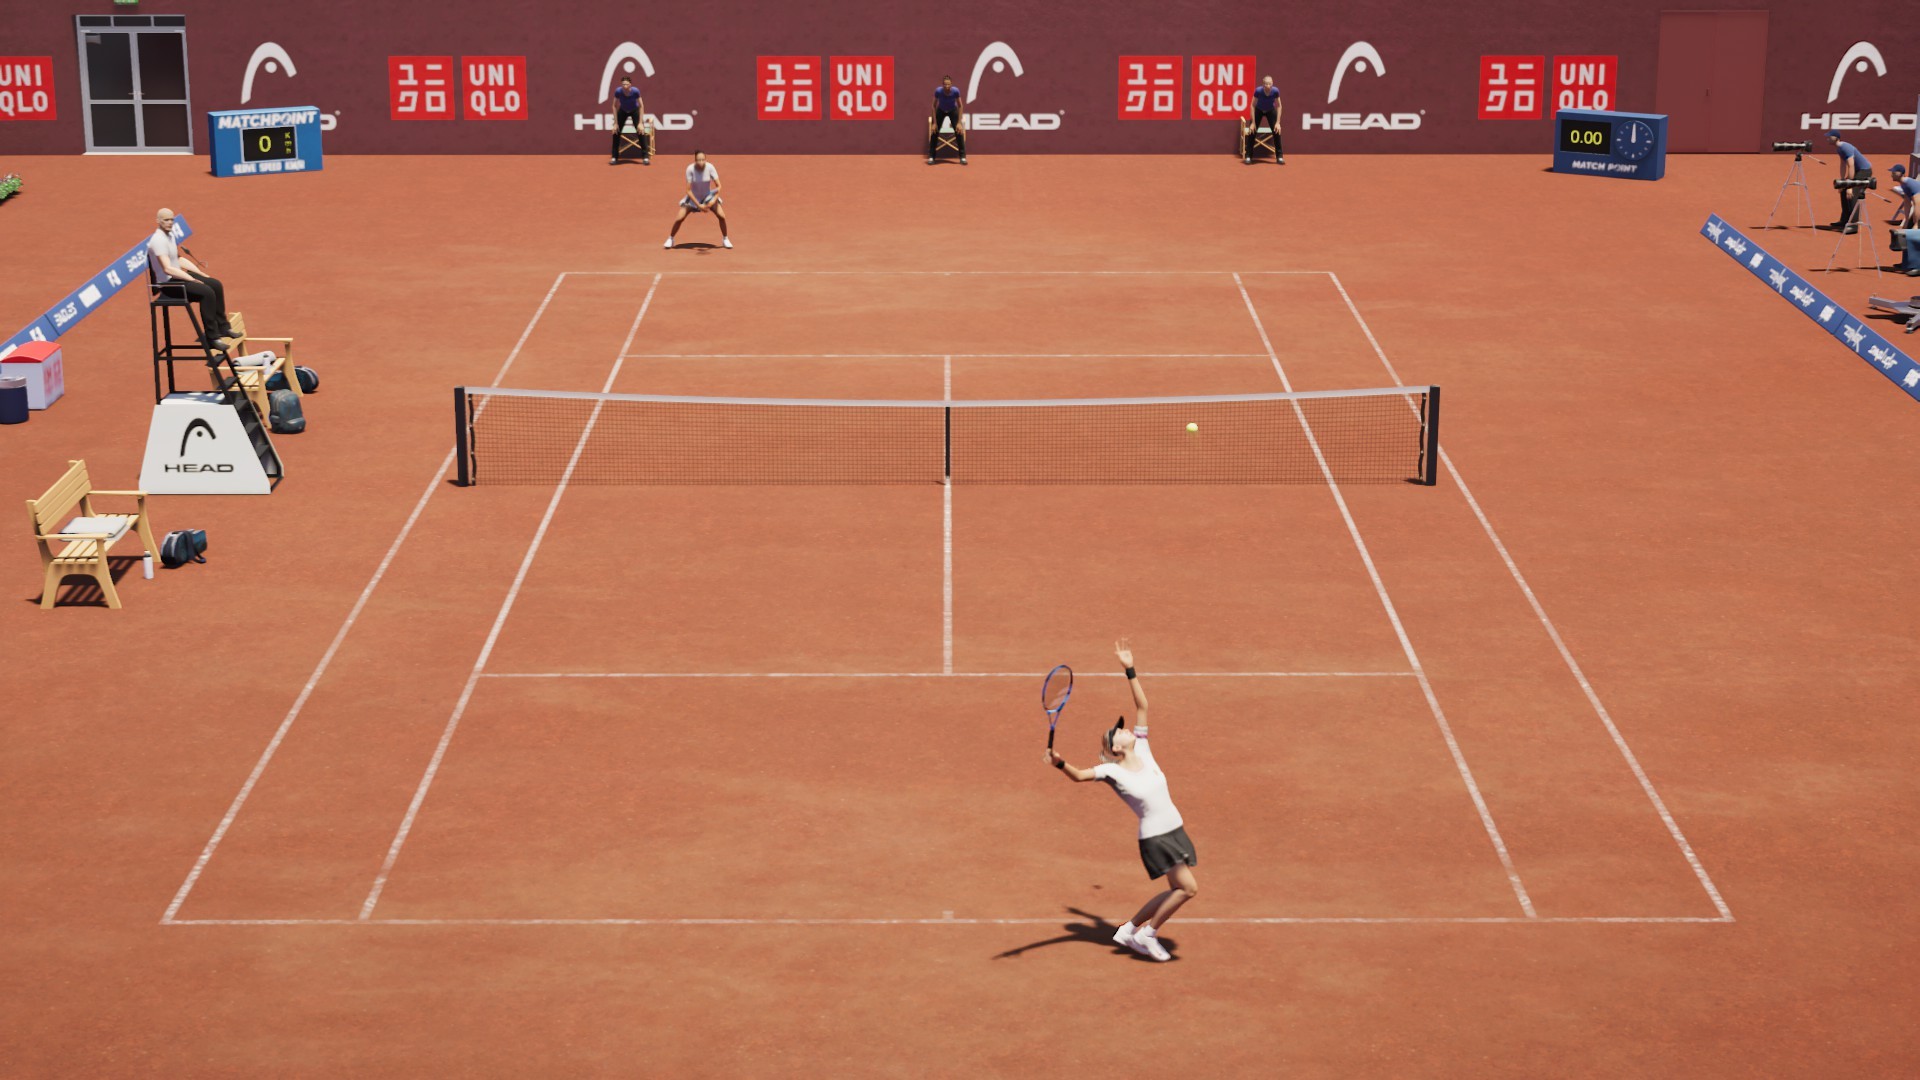 vat Vernauwd Bermad Matchpoint Tennis Championships Demo Available on Steam